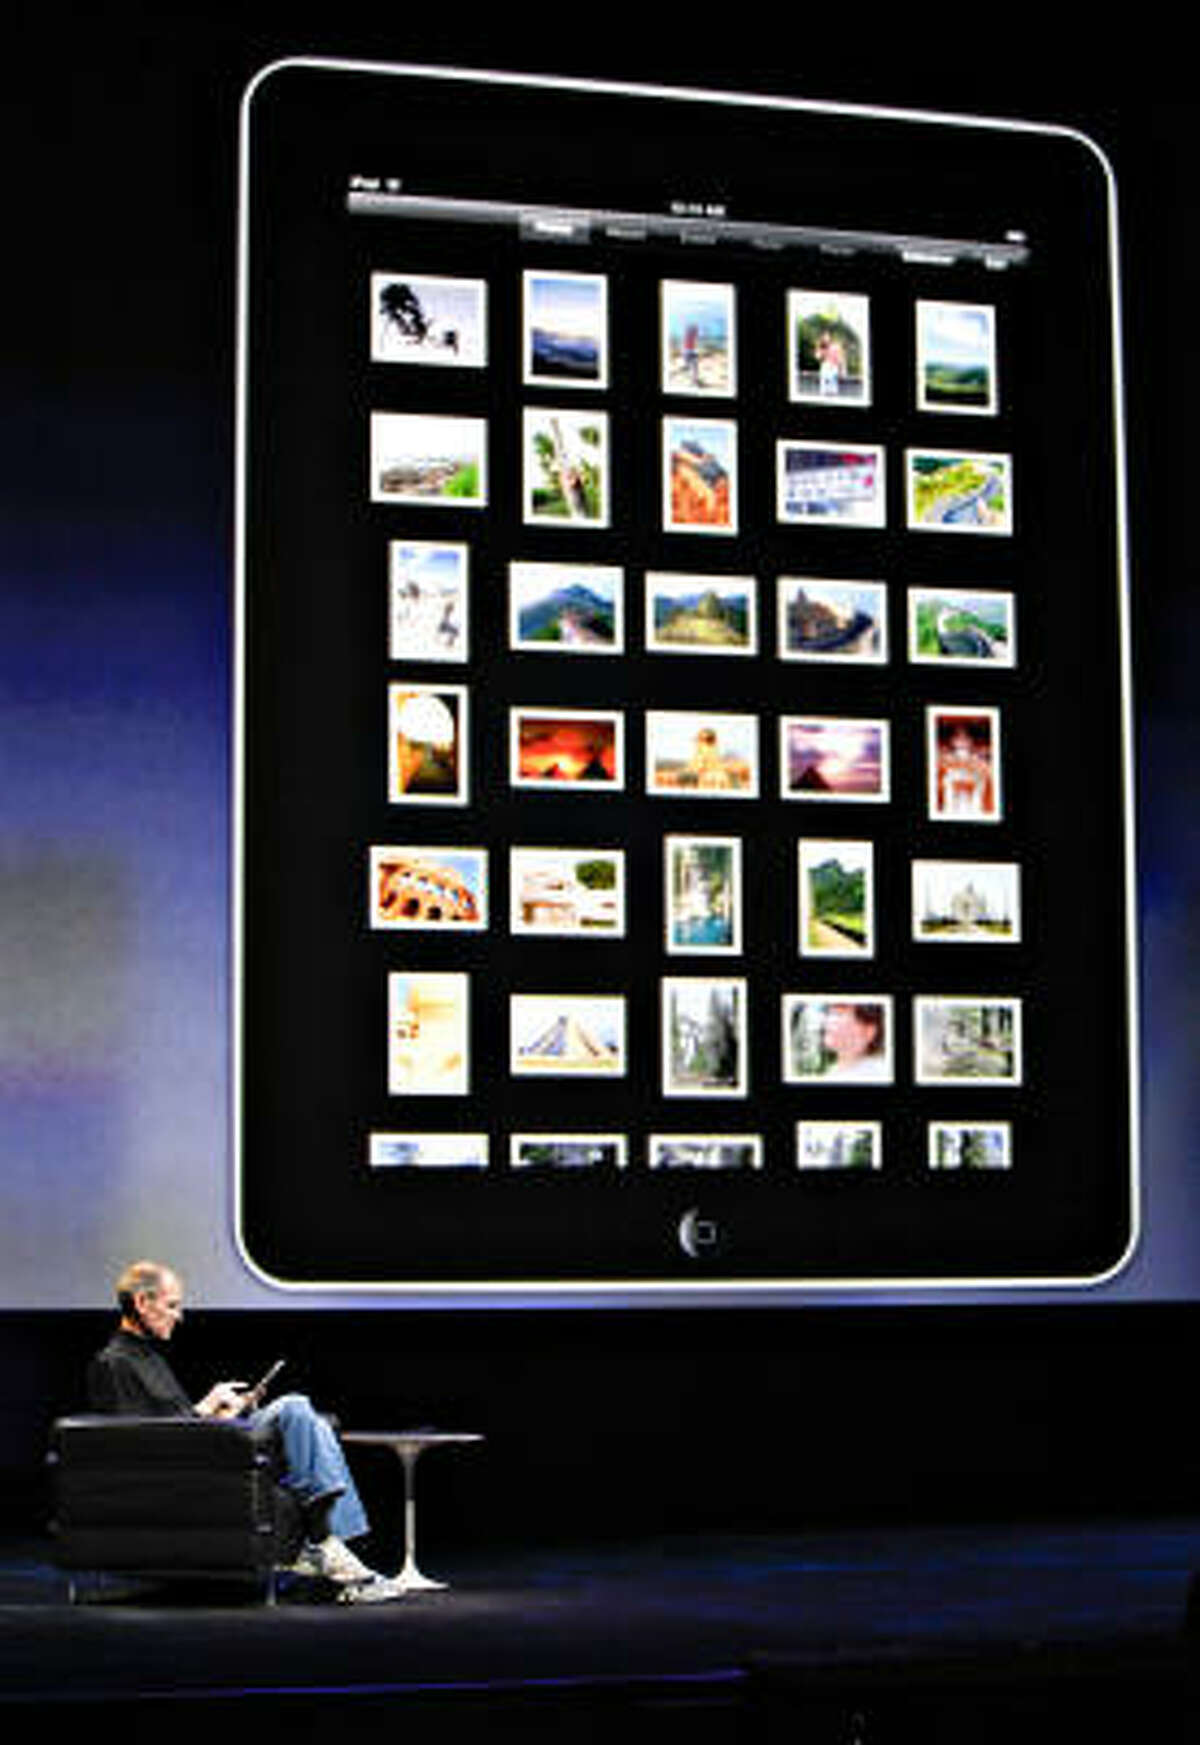 Apple Inc. is trying to expand beyond the Macintosh, iPod and iPhone, and has introduced the iPad, a tablet computer with a touch screen.